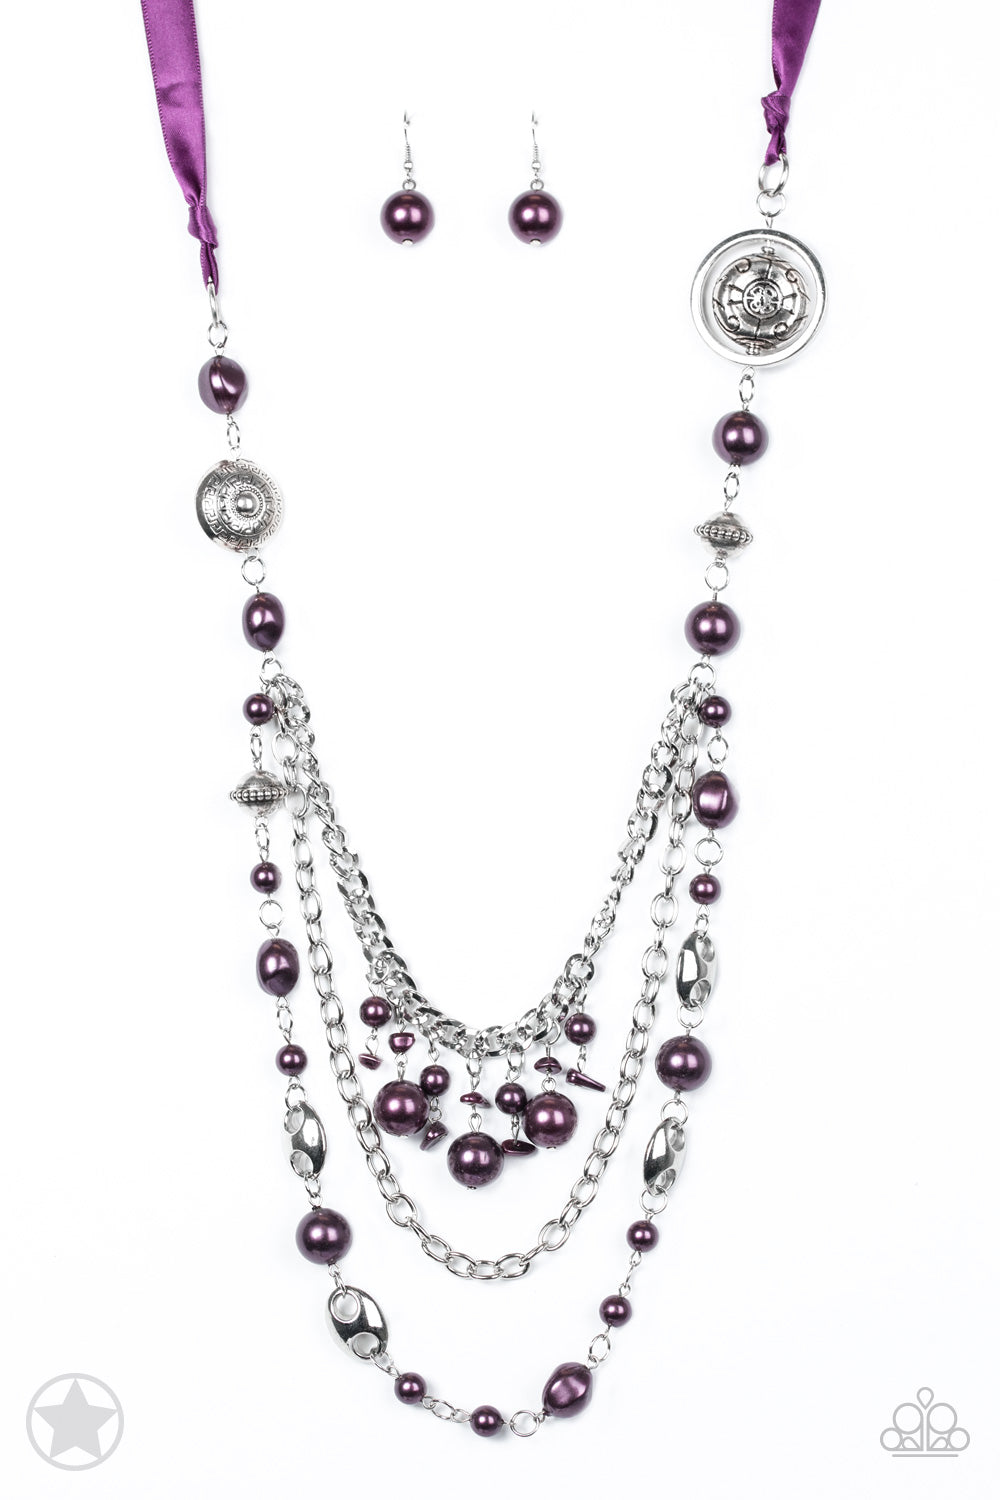 Paparazzi Accessories - All The Trimmings - Purple & Silver Necklace